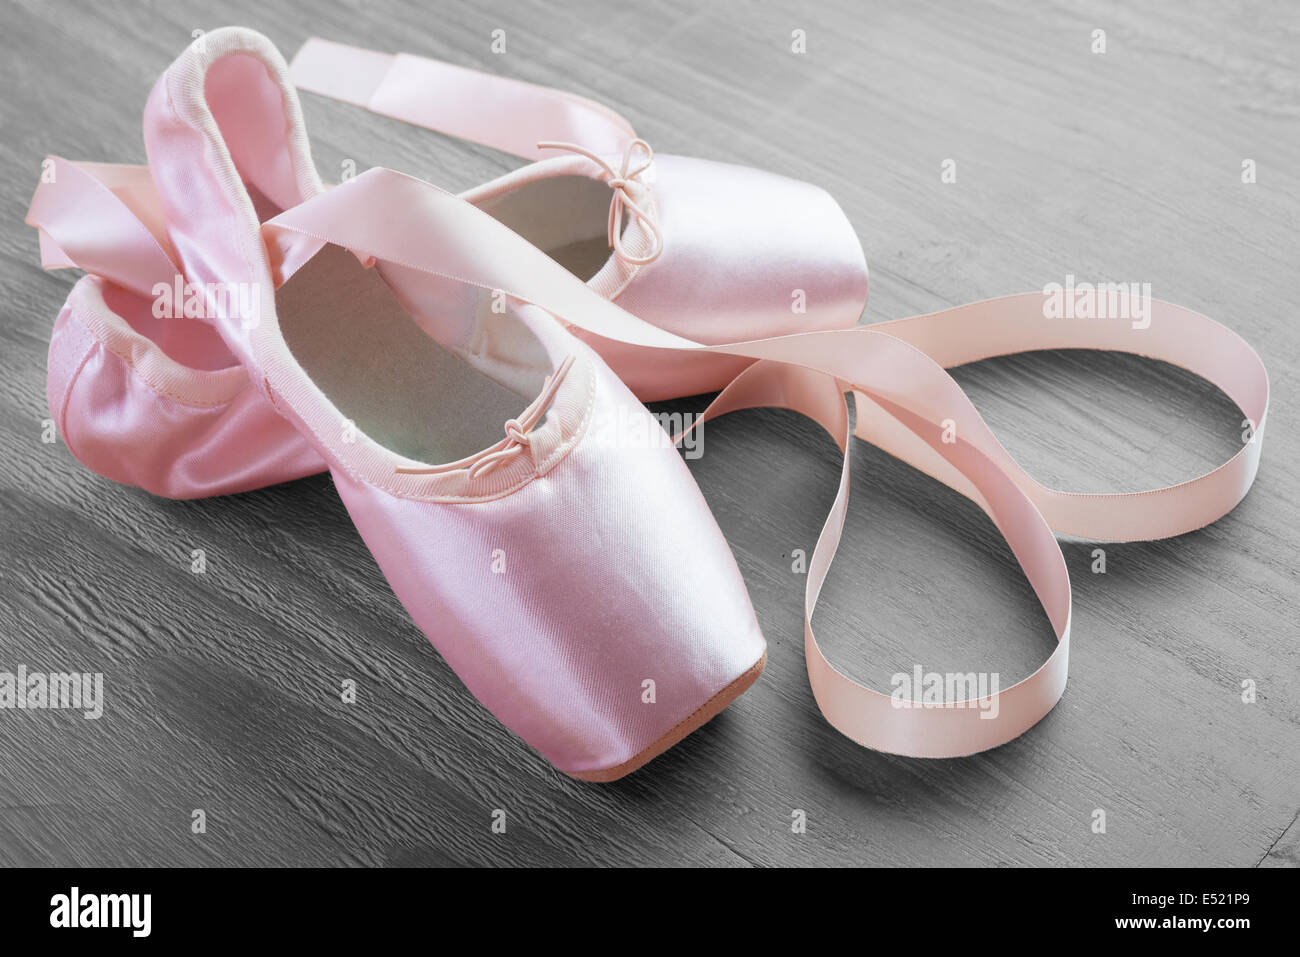 new pink ballet pointe shoes Stock Photo